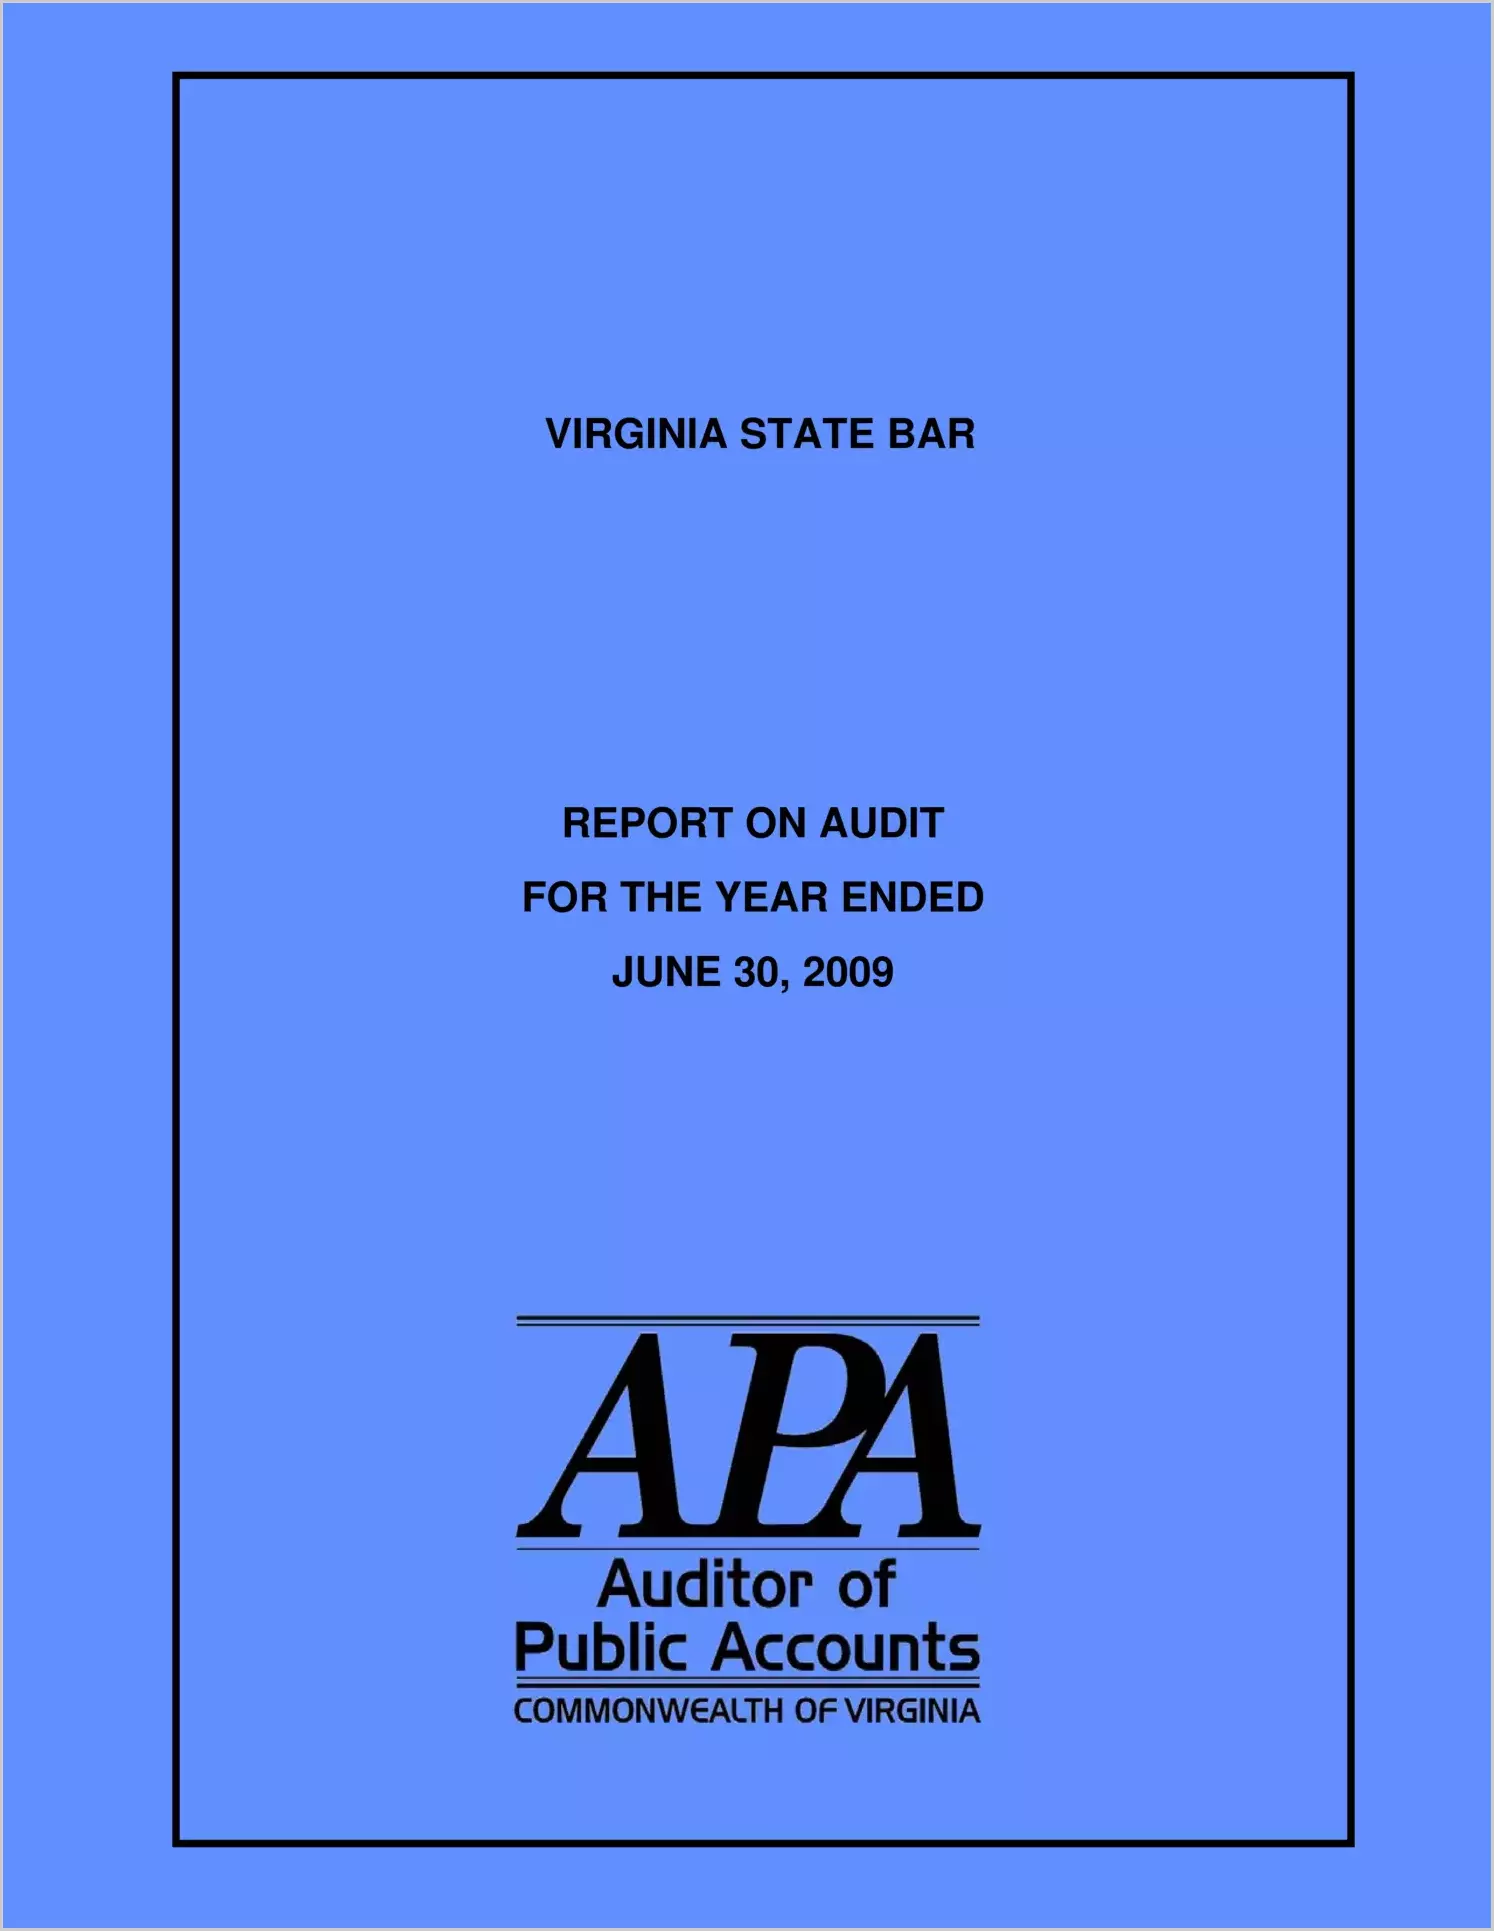 Virginia State Bar for the year ended June 30, 2009